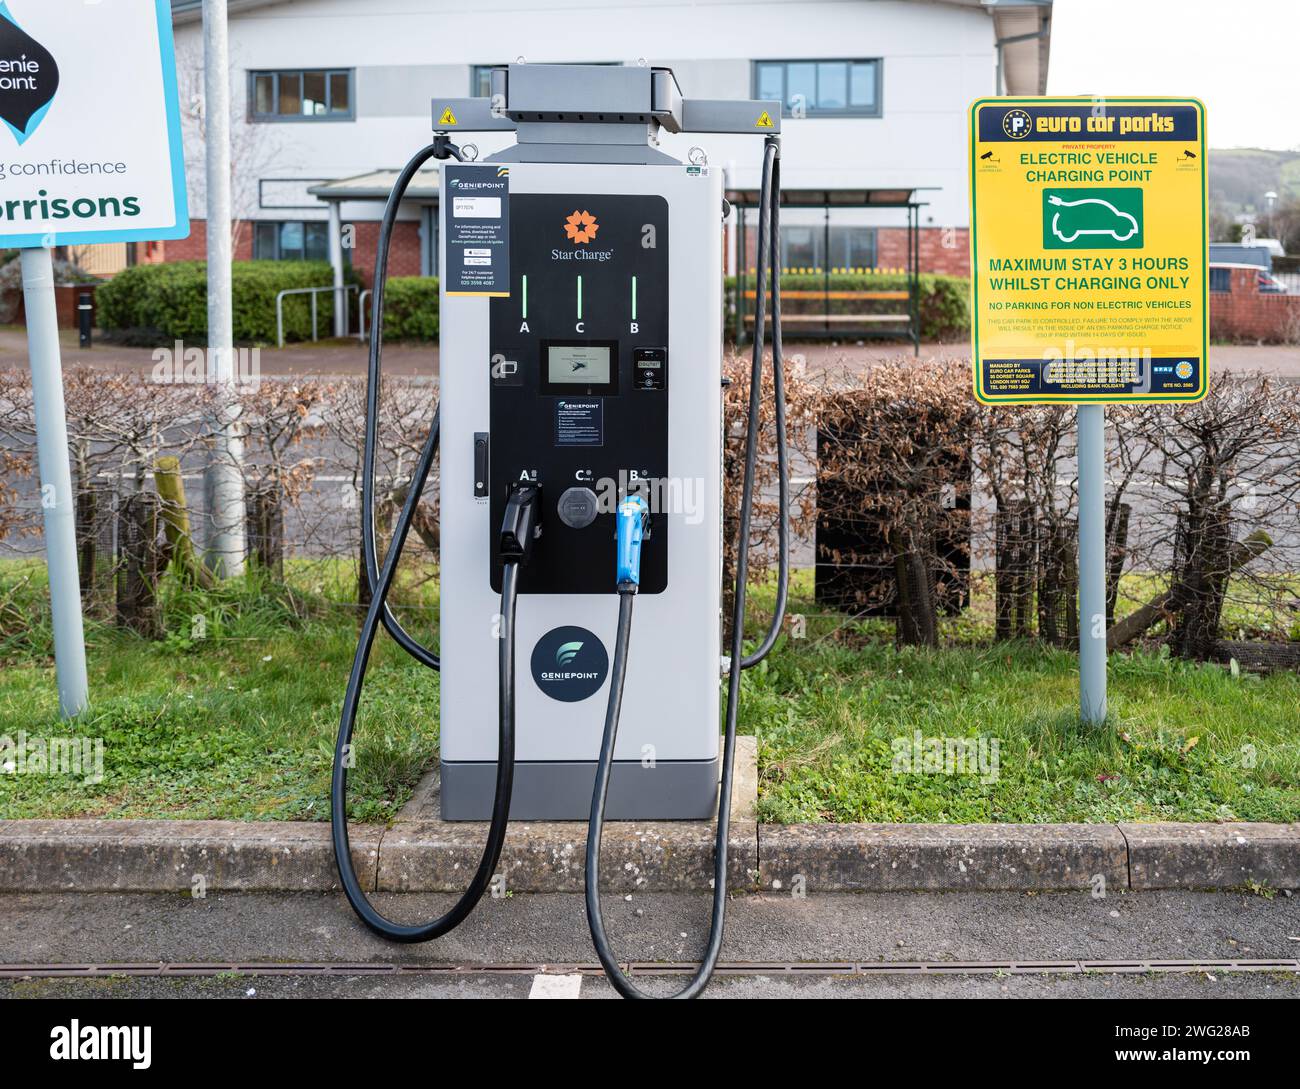 A single Sea Charger EV charging station in Morrisons supermarket car park in Teignmouth, Devon with a maximum stay of 3 hours. Stock Photo